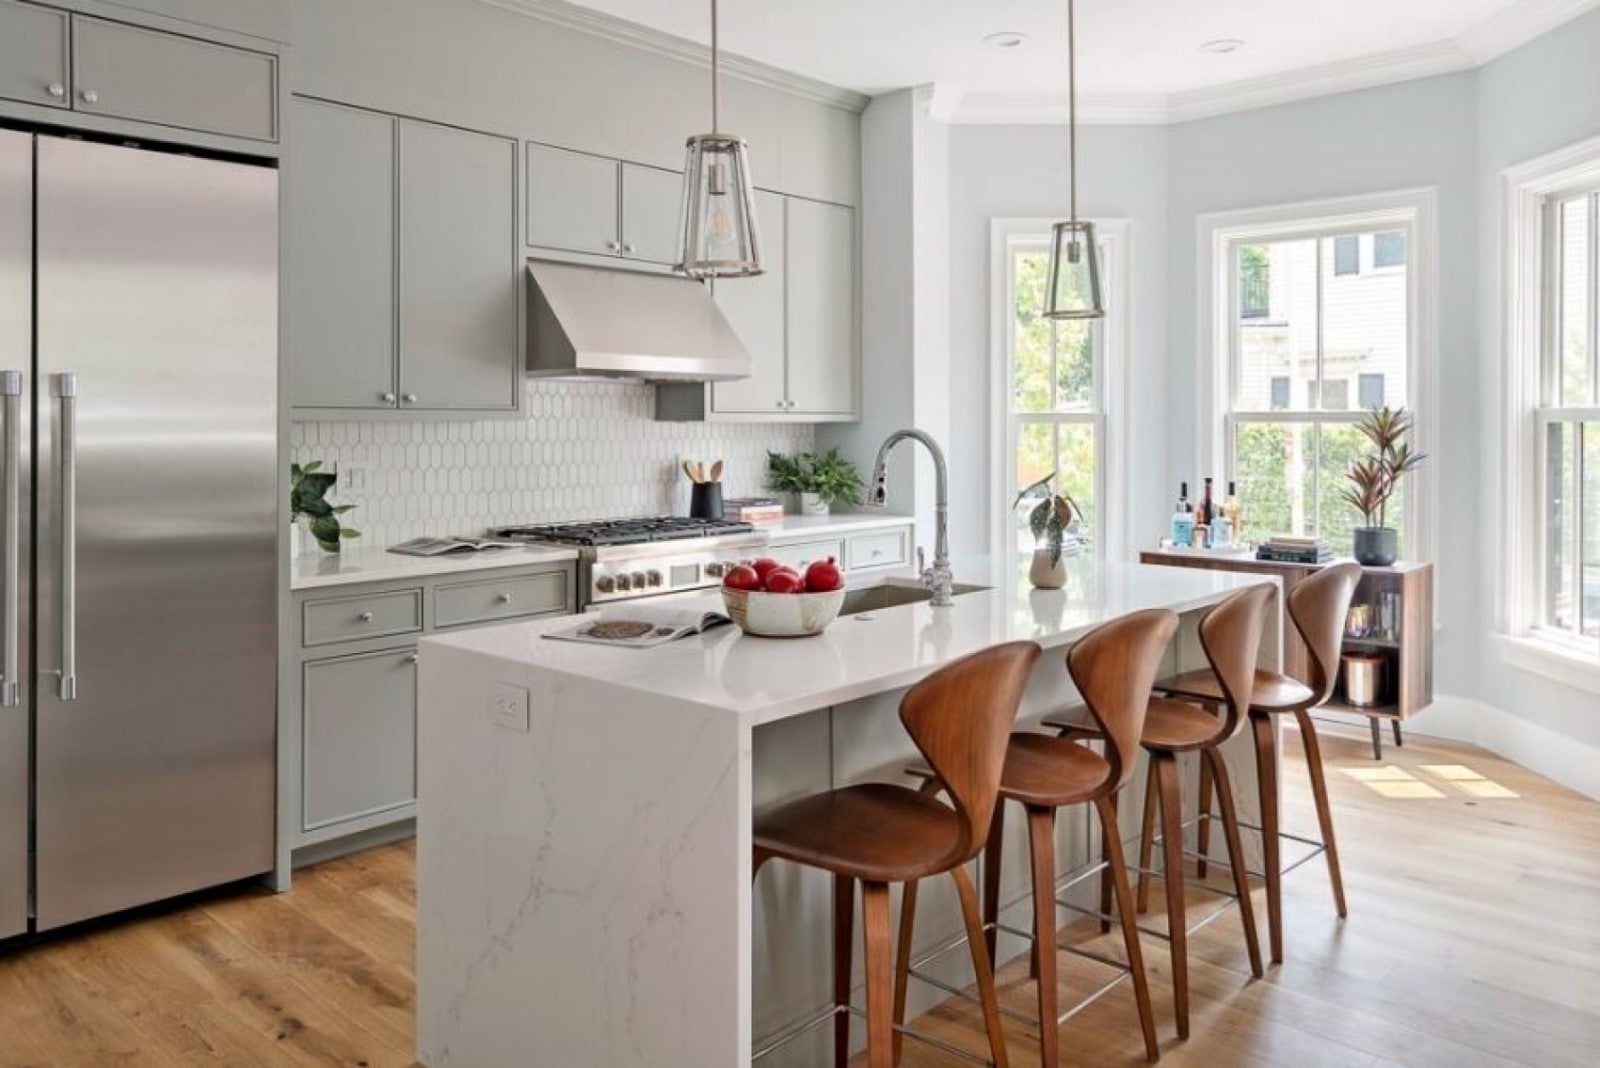 A kitchen with smooth-front gray cabinetry that goes to the ceiling, an island with waterfall edges and seating for four, hardwood flooring, two pendant lights, and a windowed breakfast nook. This photo is used to illustrate open houses going on this weekend.